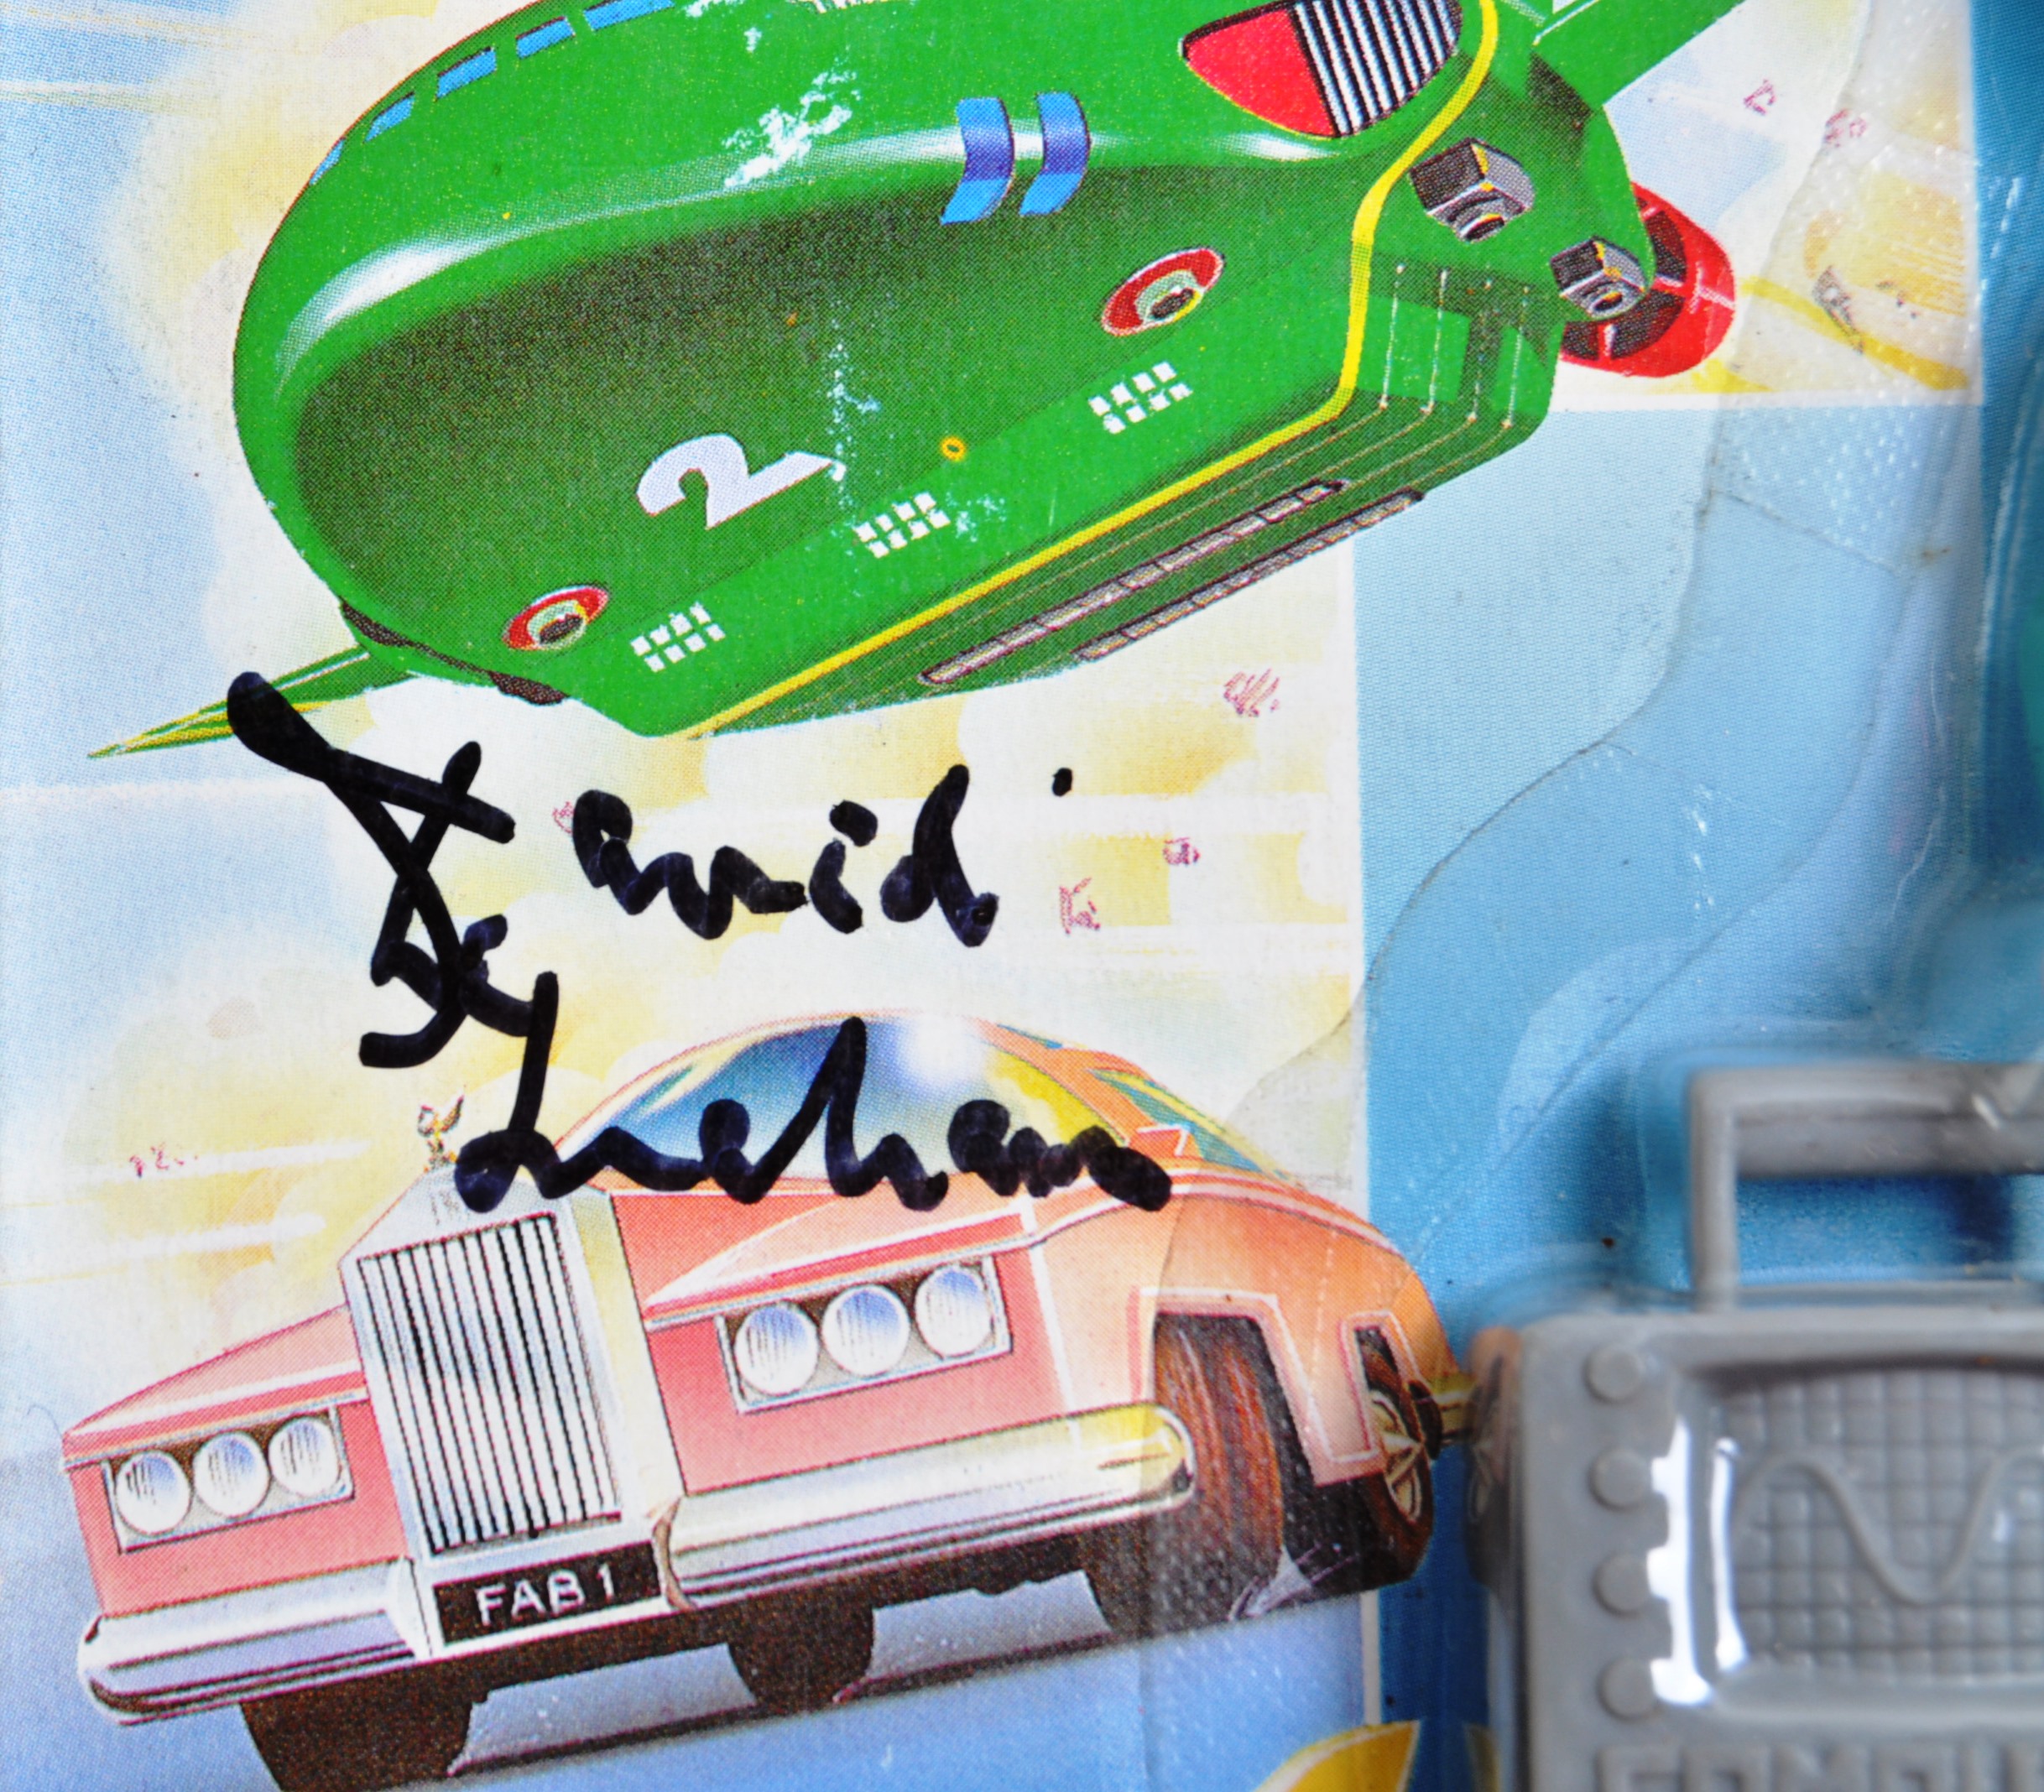 THUNDERBIRDS - GERRY ANDERSON - DAVID GRAHAM SIGNED ACTION FIGURE - Image 3 of 3